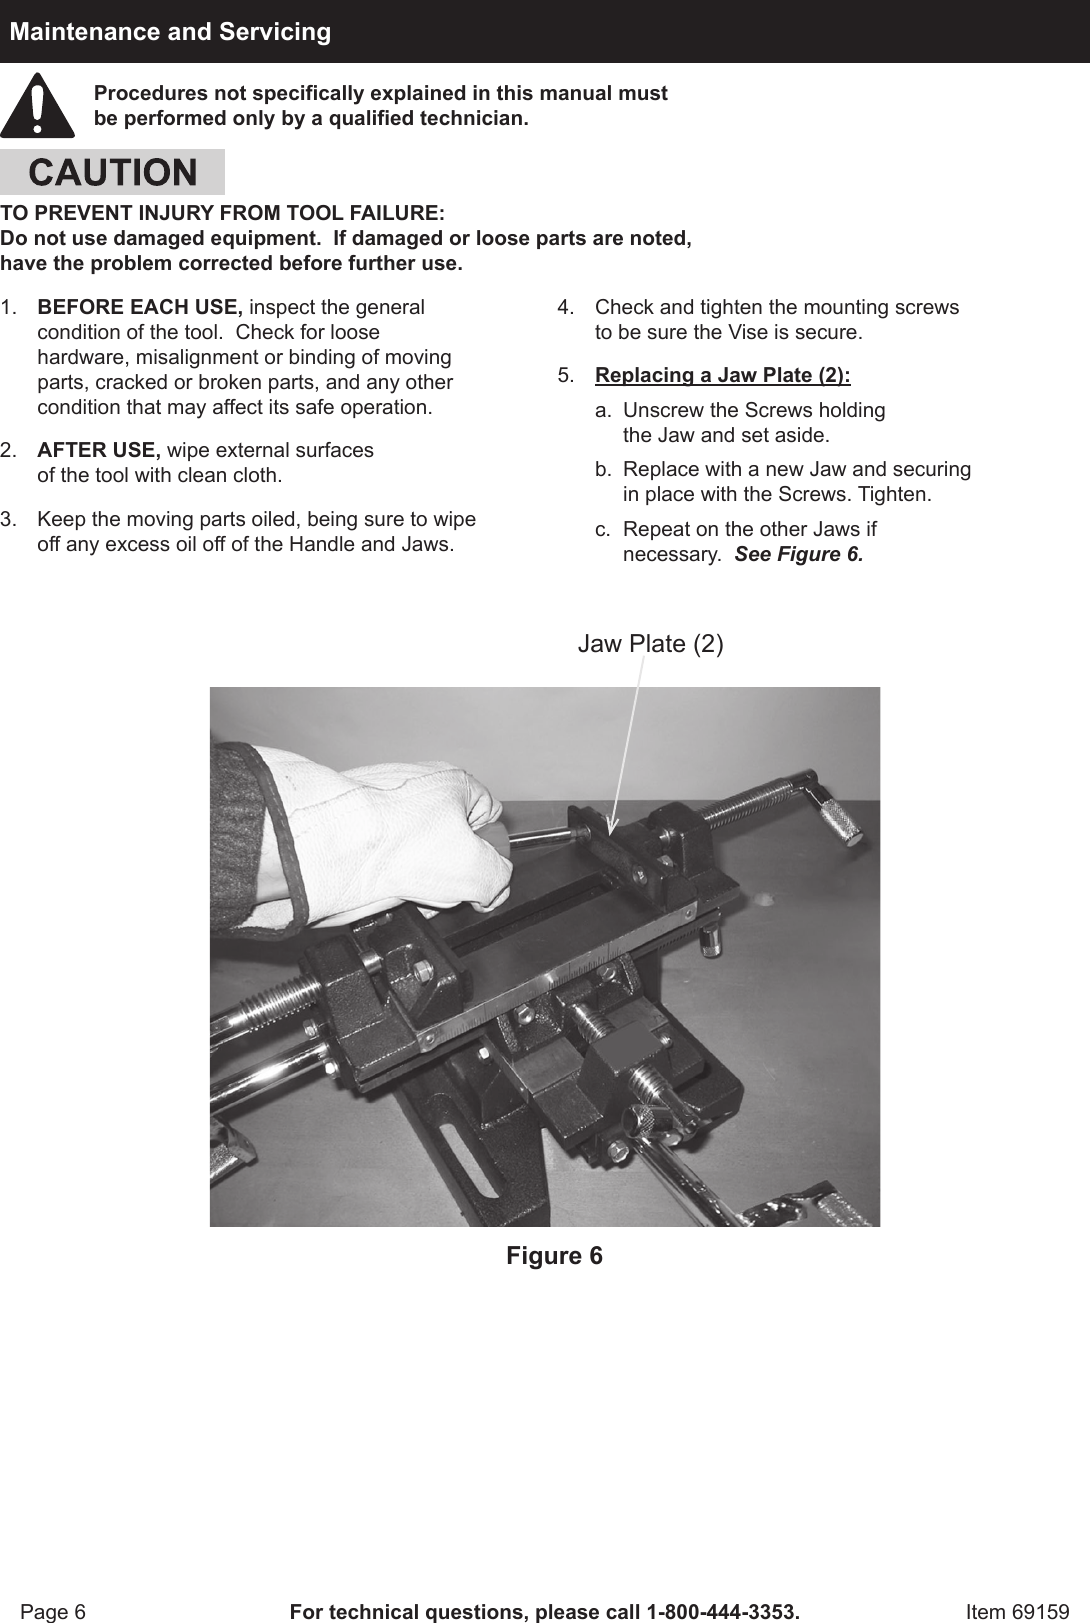 Page 6 of 8 - Harbor-Freight Harbor-Freight-5-In-Rugged-Cast-Iron-Drill-Press-Milling-Vise-Product-Manual-  Harbor-freight-5-in-rugged-cast-iron-drill-press-milling-vise-product-manual